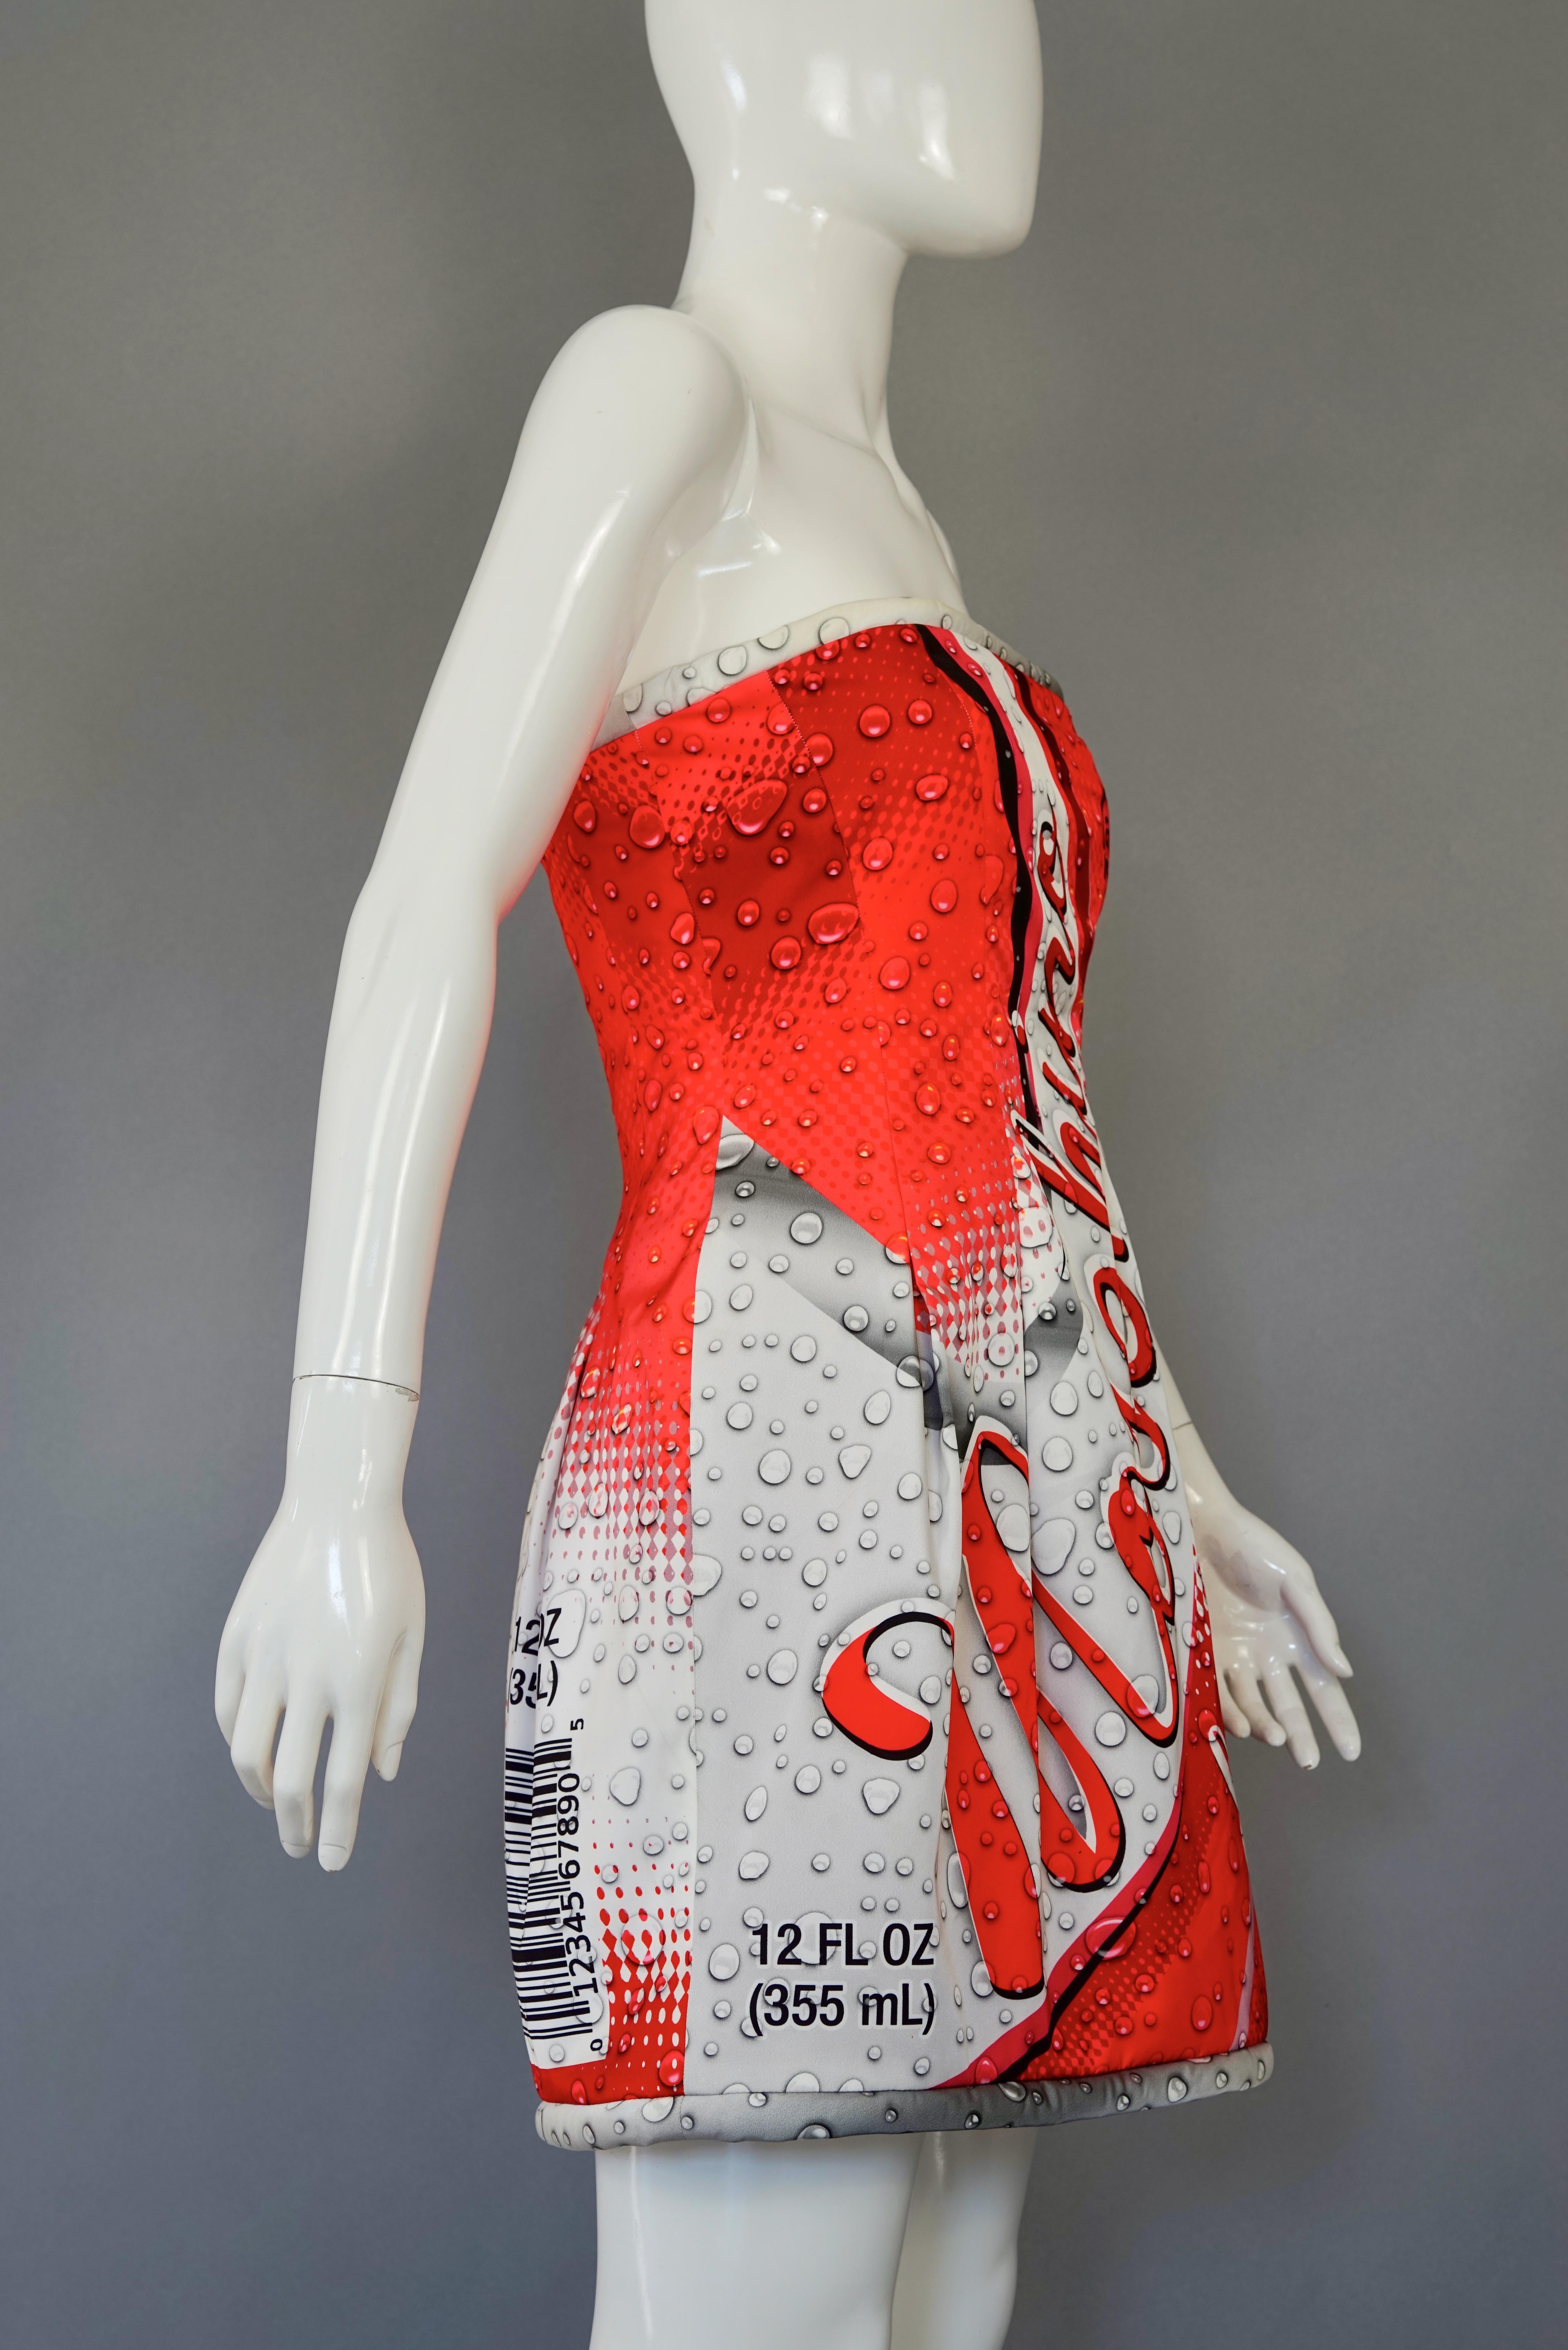 MOSCHINO COUTURE Cola Bustier Dress In Excellent Condition For Sale In Kingersheim, Alsace